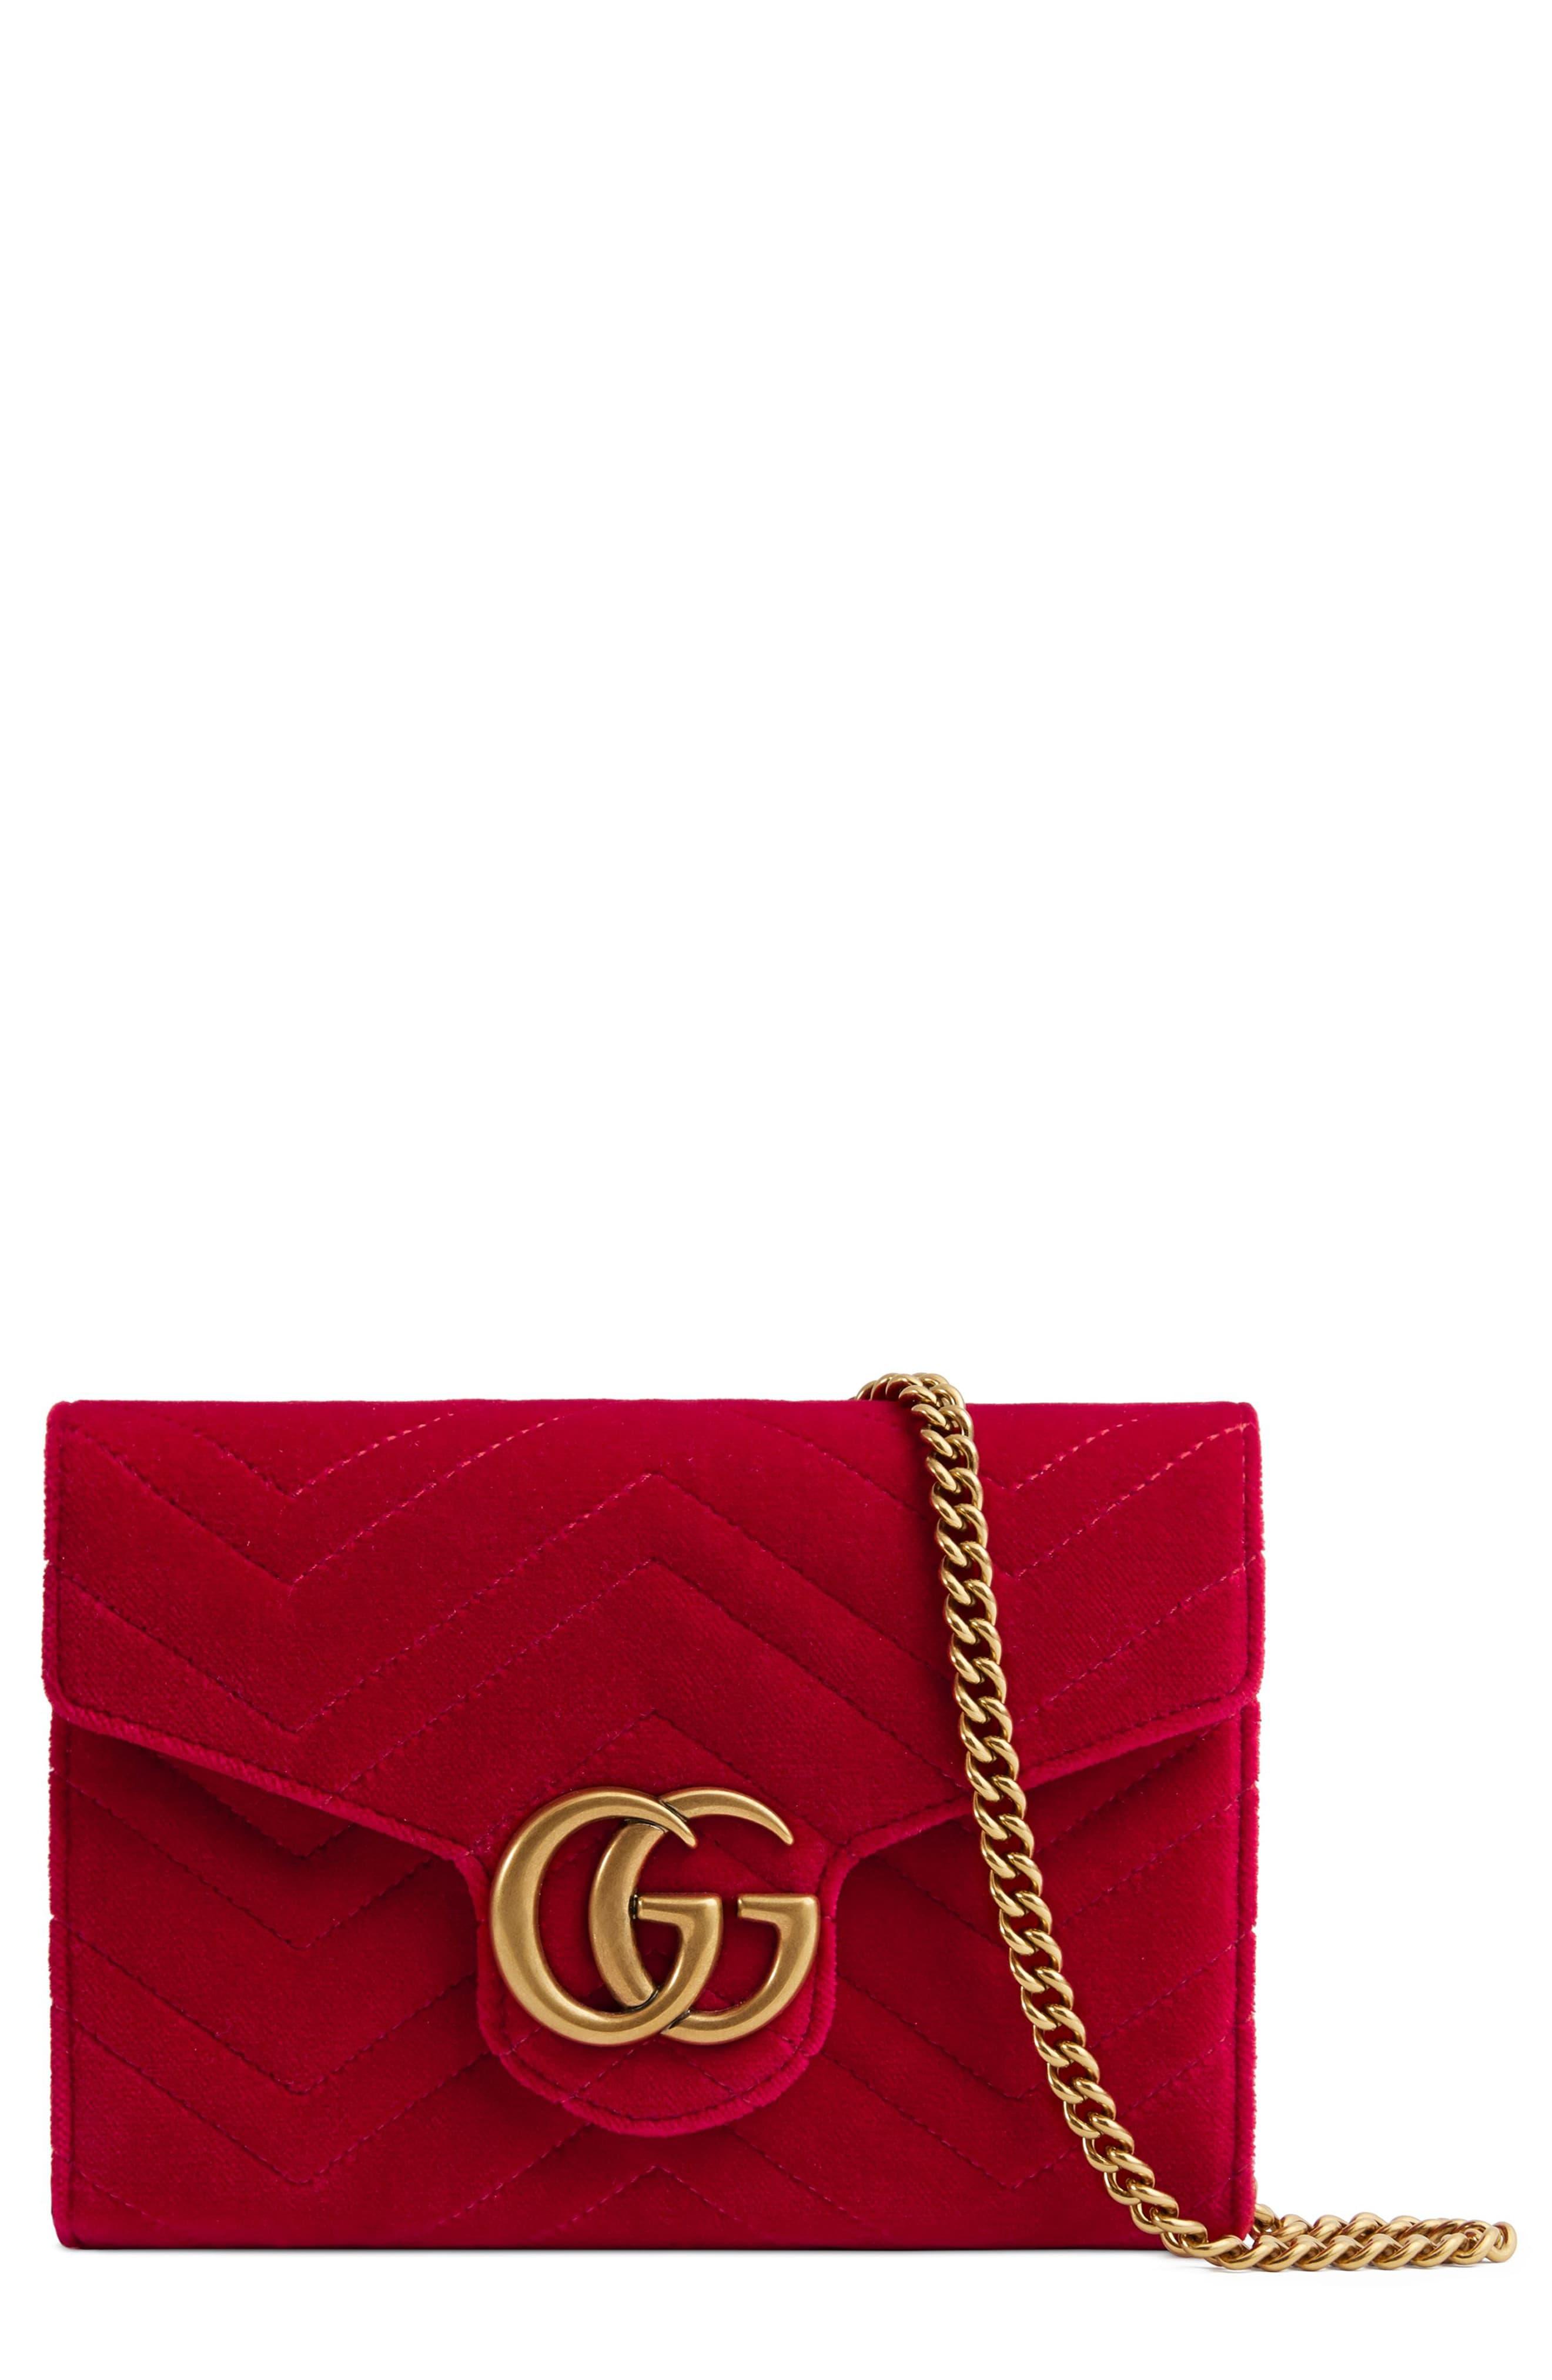 Gucci Velvet GG Marmont Chain Wallet in Red - Lyst